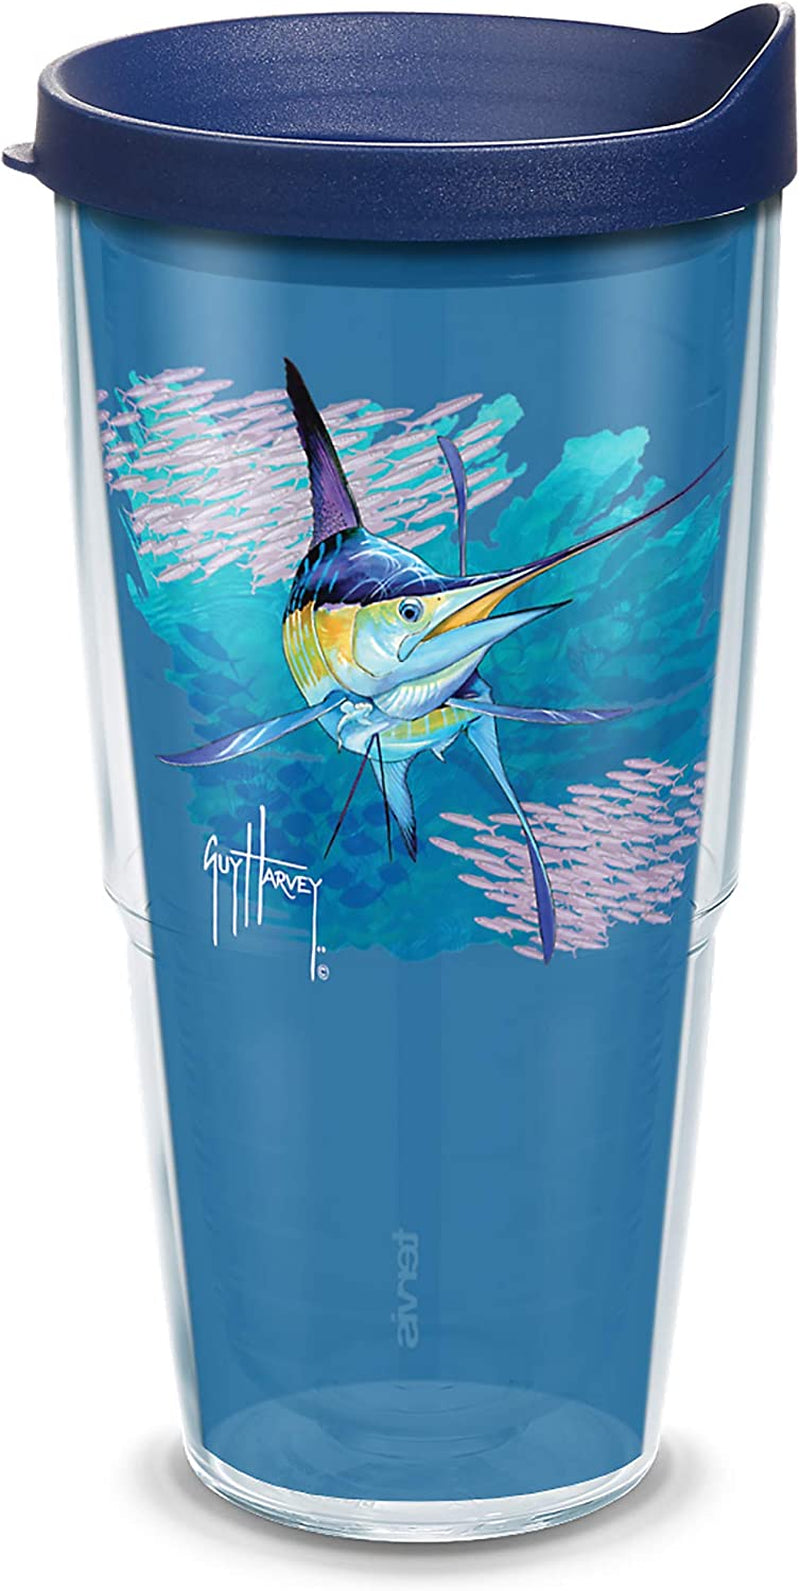 Tervis Made in USA Double Walled Guy Harvey - Offshore Haul Marlin Insulated Tumbler Cup Keeps Drinks Cold & Hot, 16Oz Mug, Classic Home & Garden > Kitchen & Dining > Tableware > Drinkware Tervis Classic 24oz 